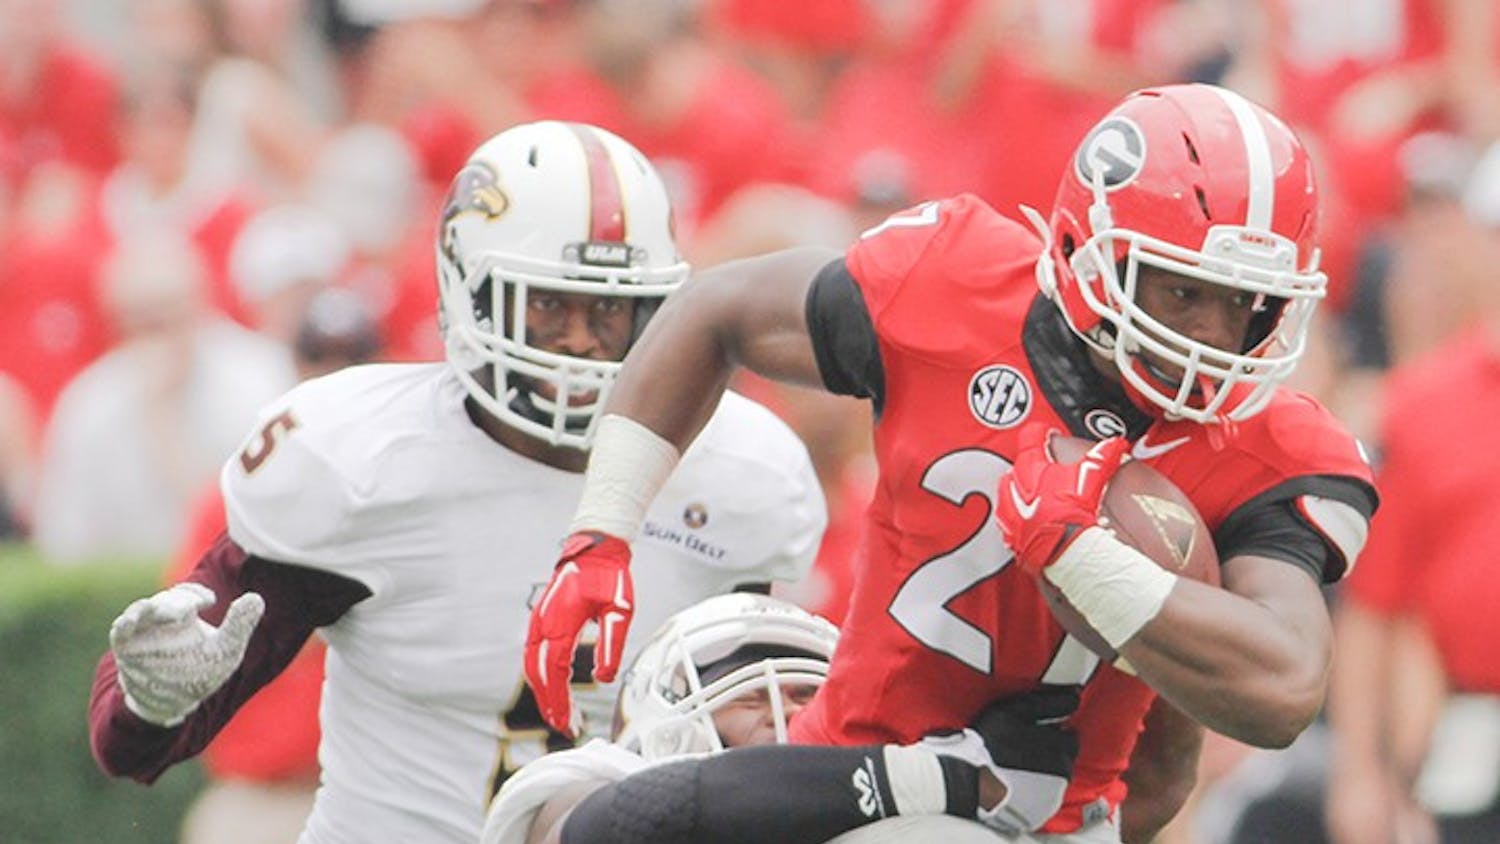 Georgia tailback Nick Chubb (27) runs the ball despite Louisiana-Monroe safety Mitch Lane (7) attempts to tackle him in the second half of an NCAA college football game against Louisiana-Monroe, on  Saturday, Sept. 5, 2015, at Sanford Stadium, in Athens, Georgia. (Photo/Taylor Carpenter)